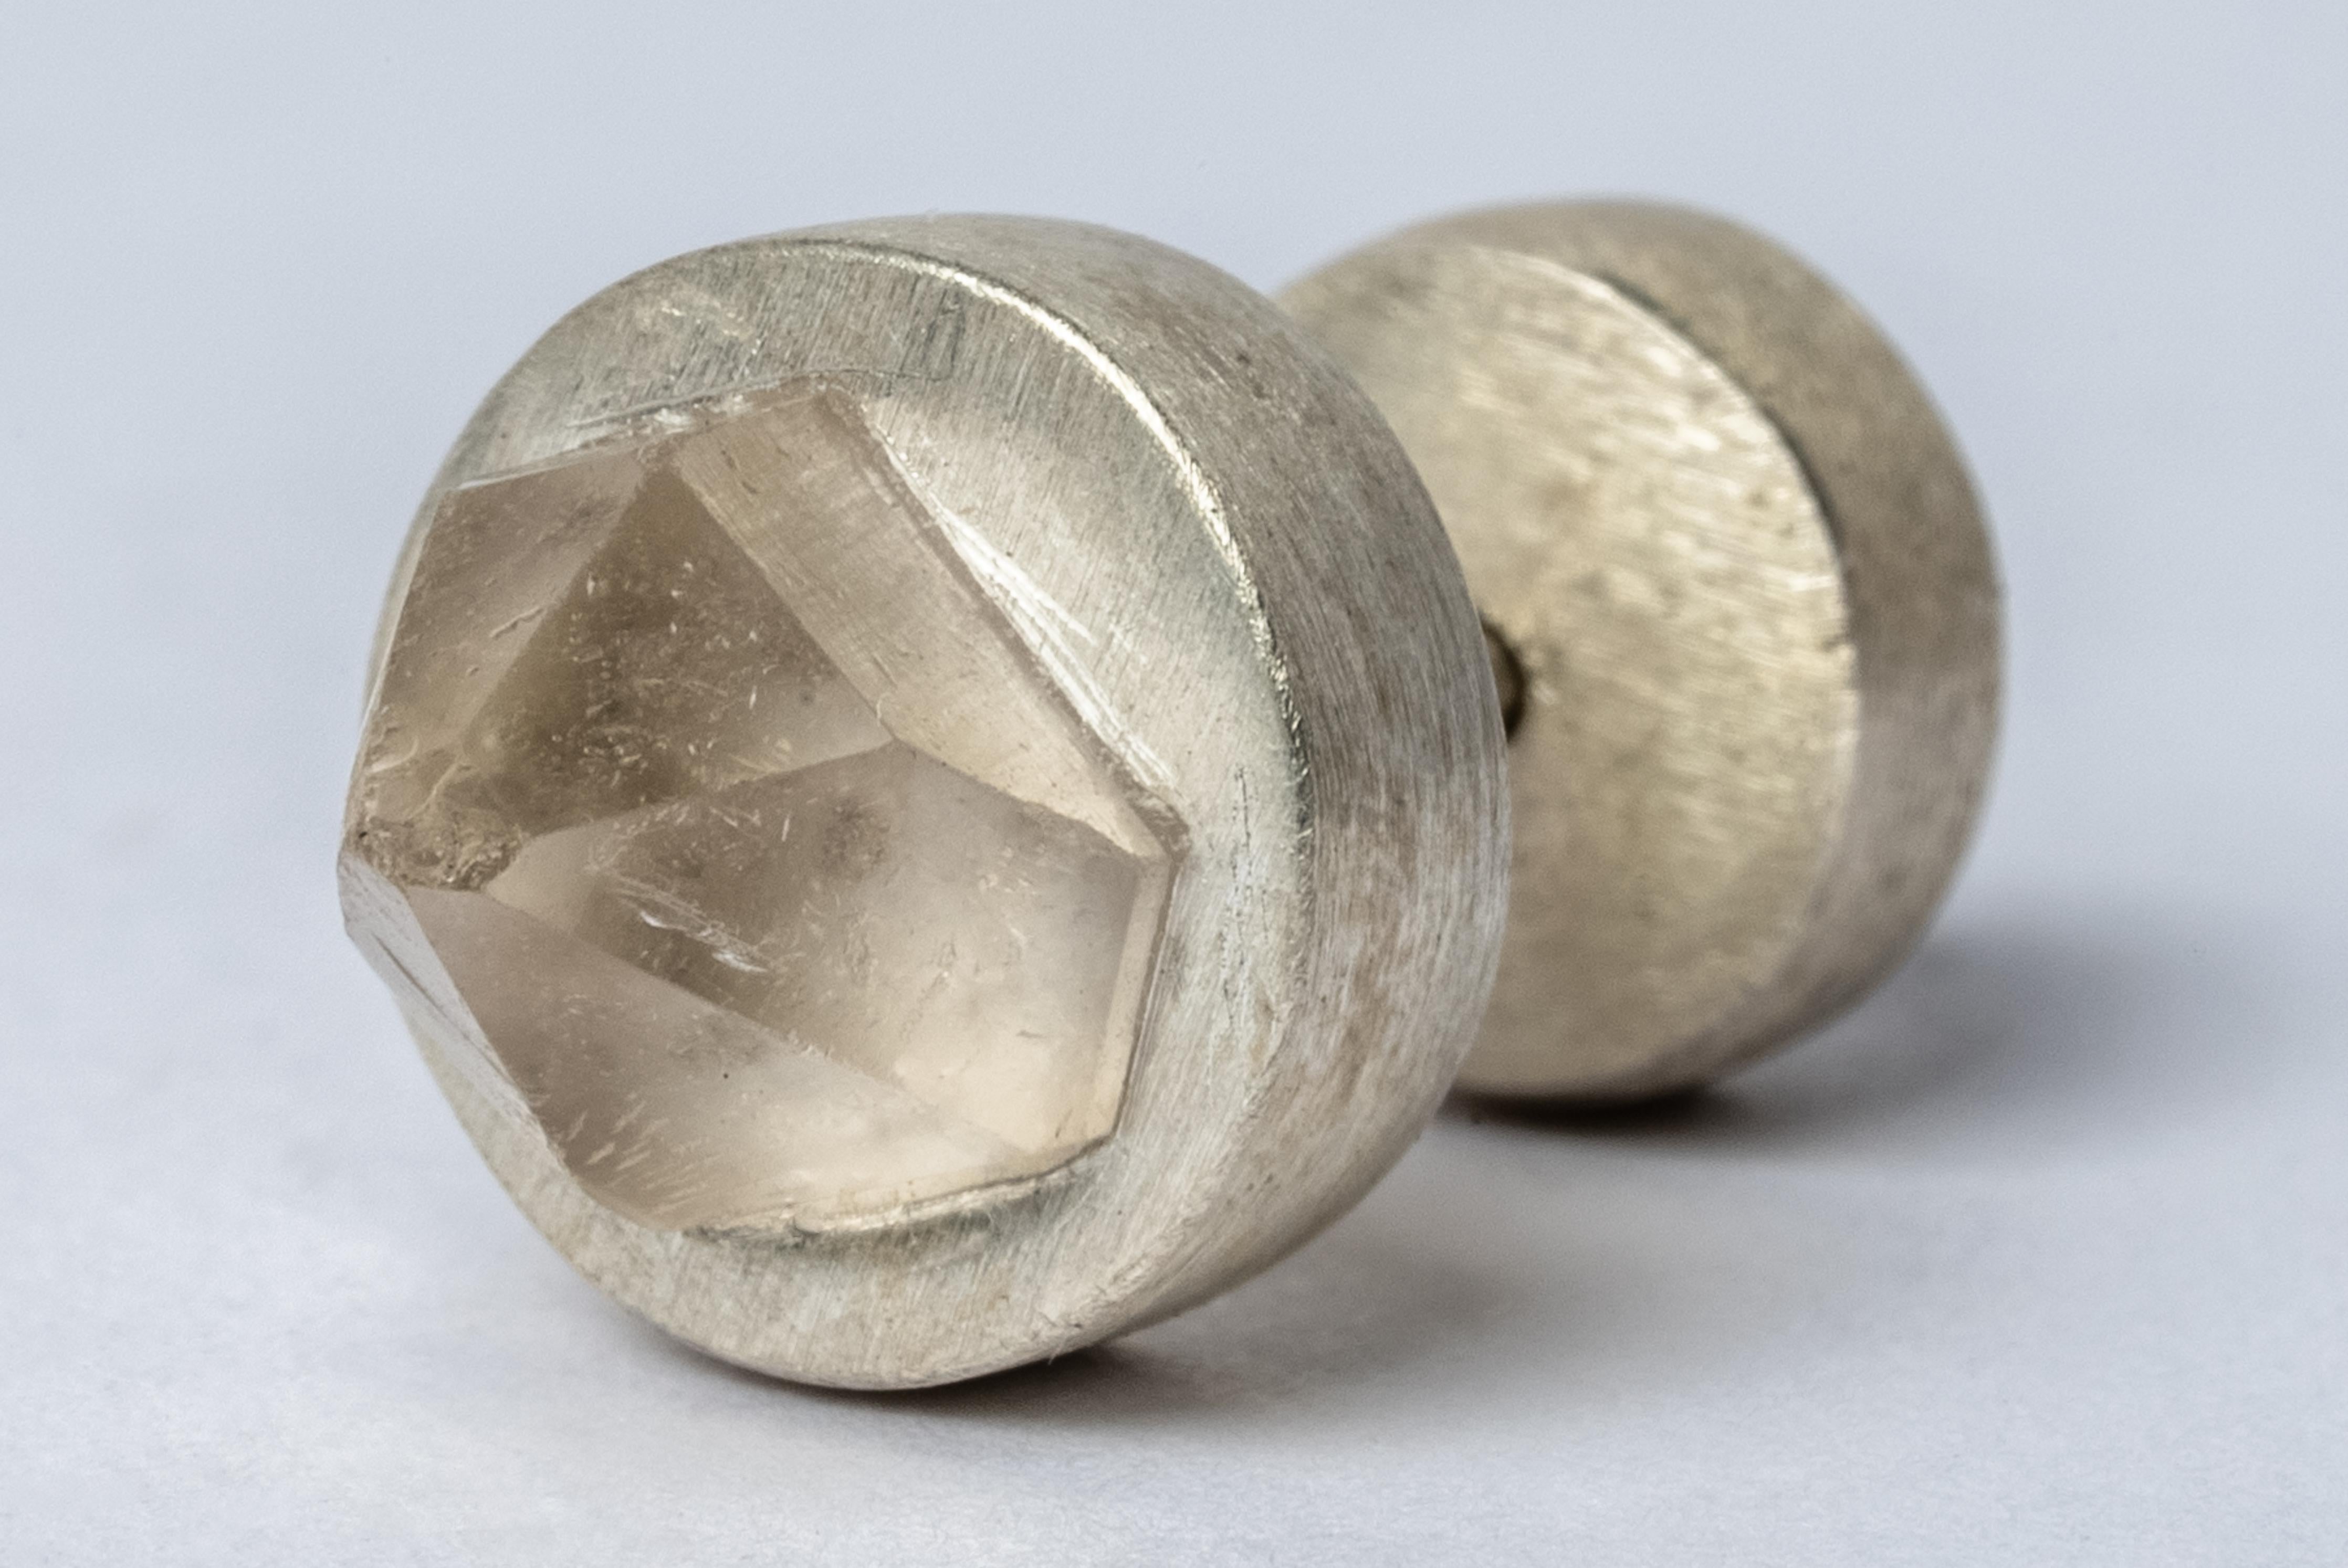 Stud earring in matte sterling silver and a rough of herkimer diamond. We use facet-grade rough gemstones which means that the traditional intention of this rough material is cut faceted stones. This assures the highest quality material while